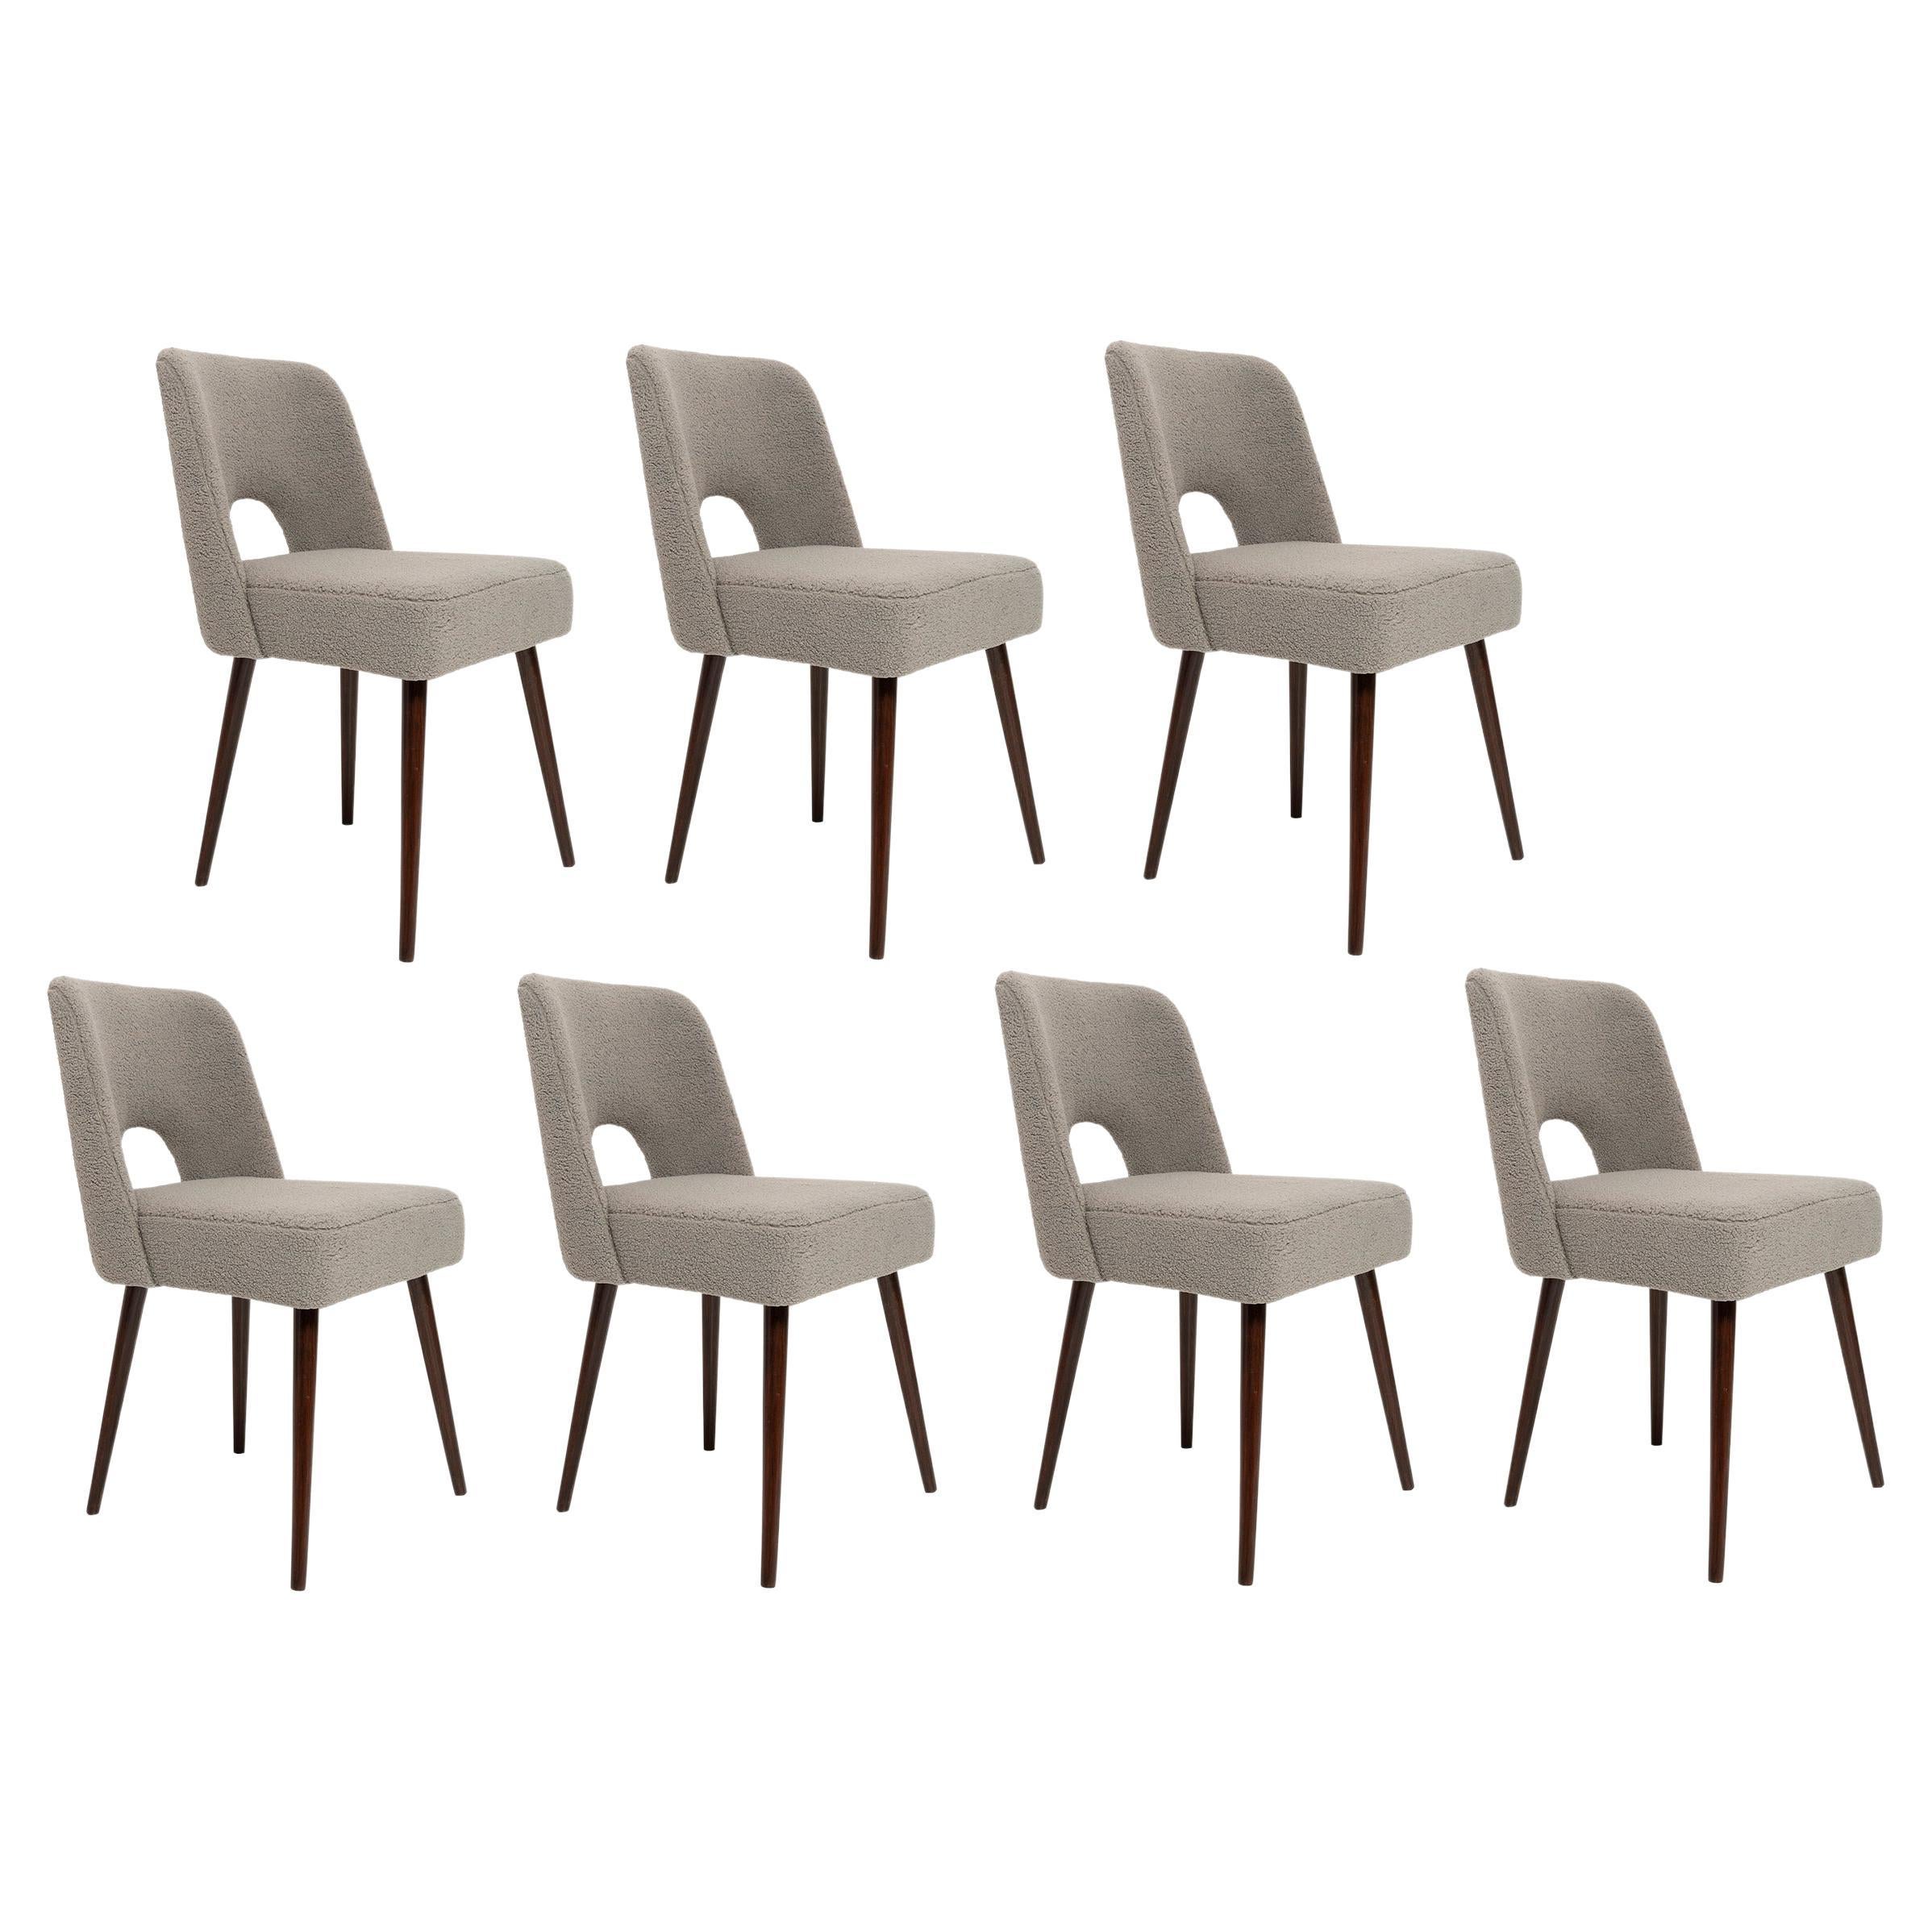 Set of Seven Gray Boucle 'Shell' Chairs, Dark Beech Wood, Europe, 1960s